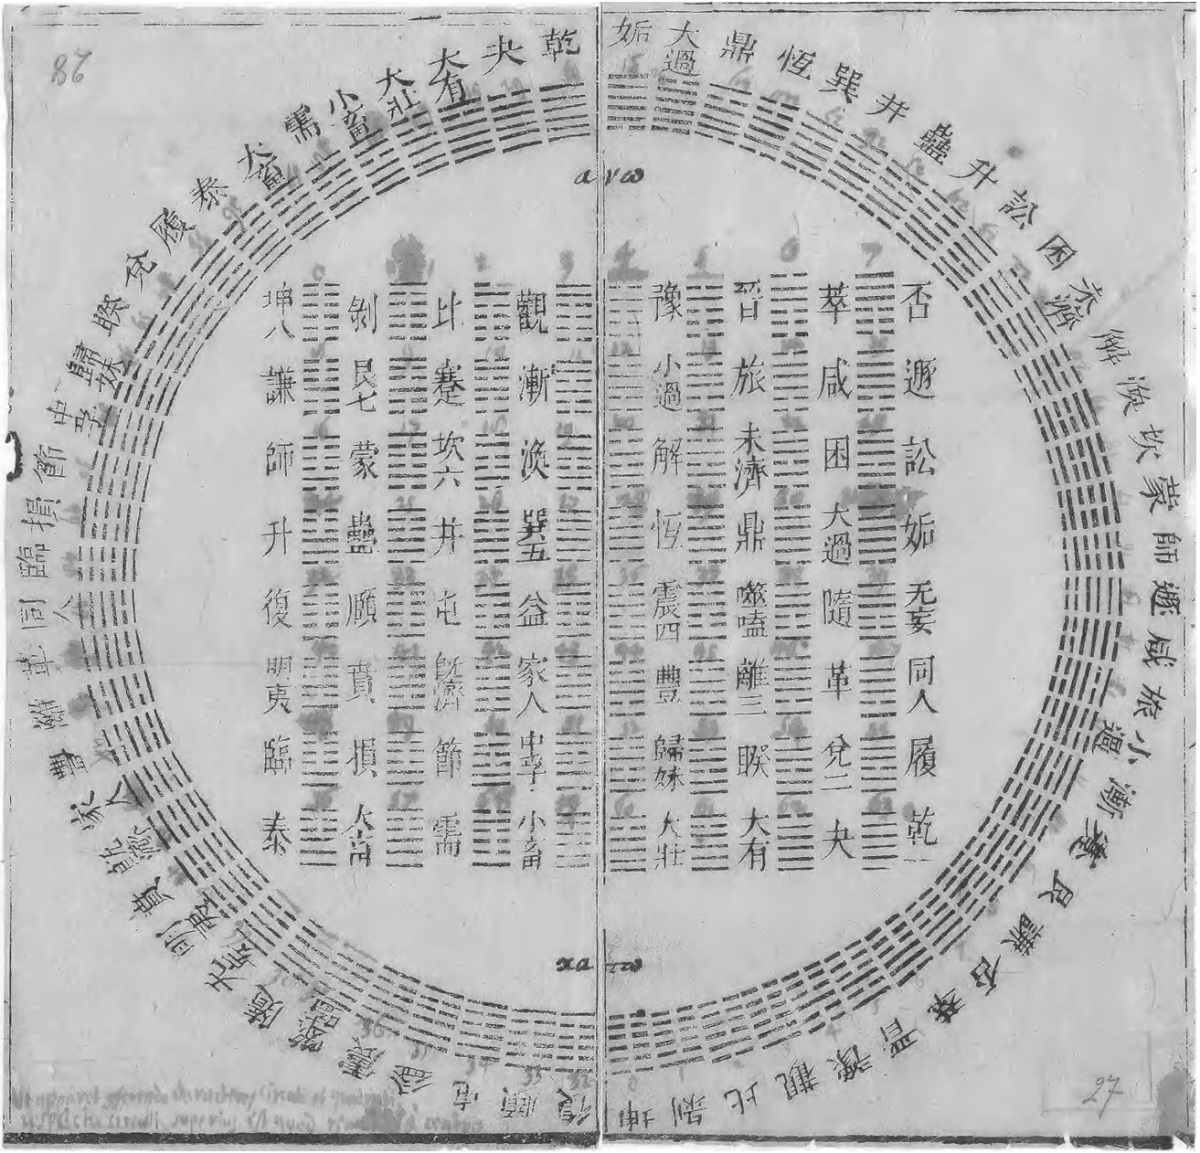 Eco: The I Ching and the Binary Calculus | Samizdat